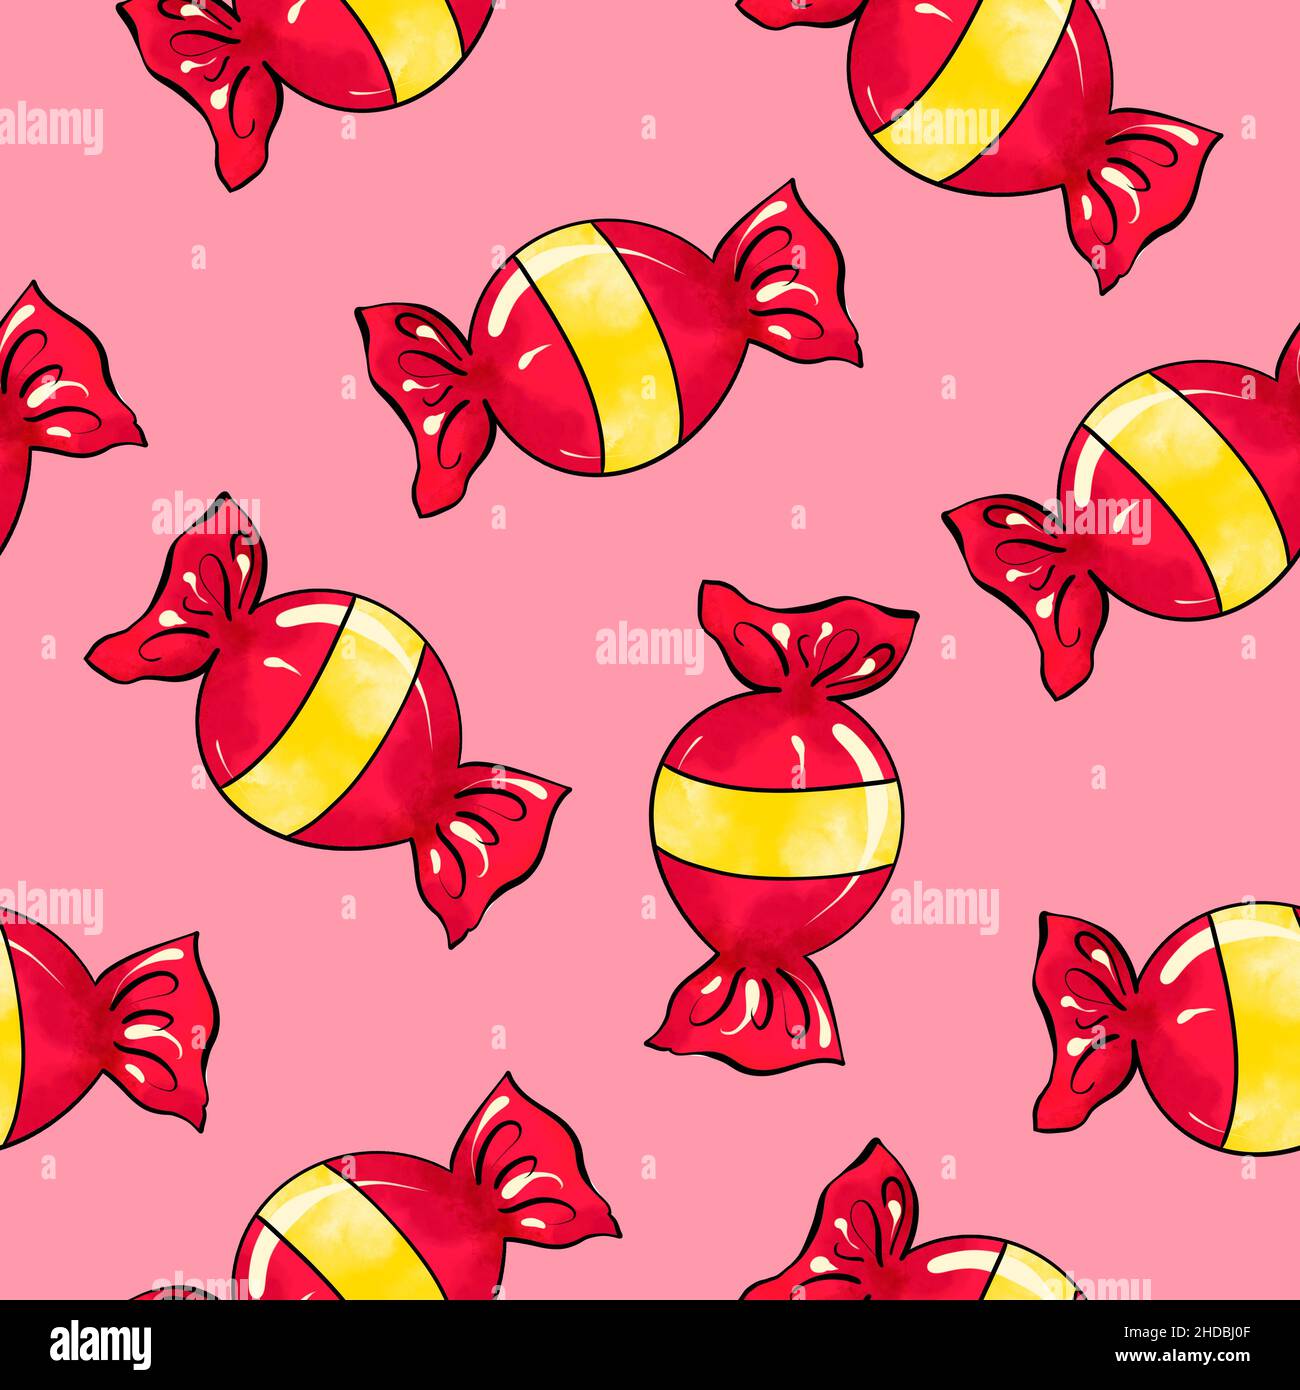 Seamless raster pattern of candy wrapped in red color with yellow stripe on pink background. High quality illustration Stock Photo